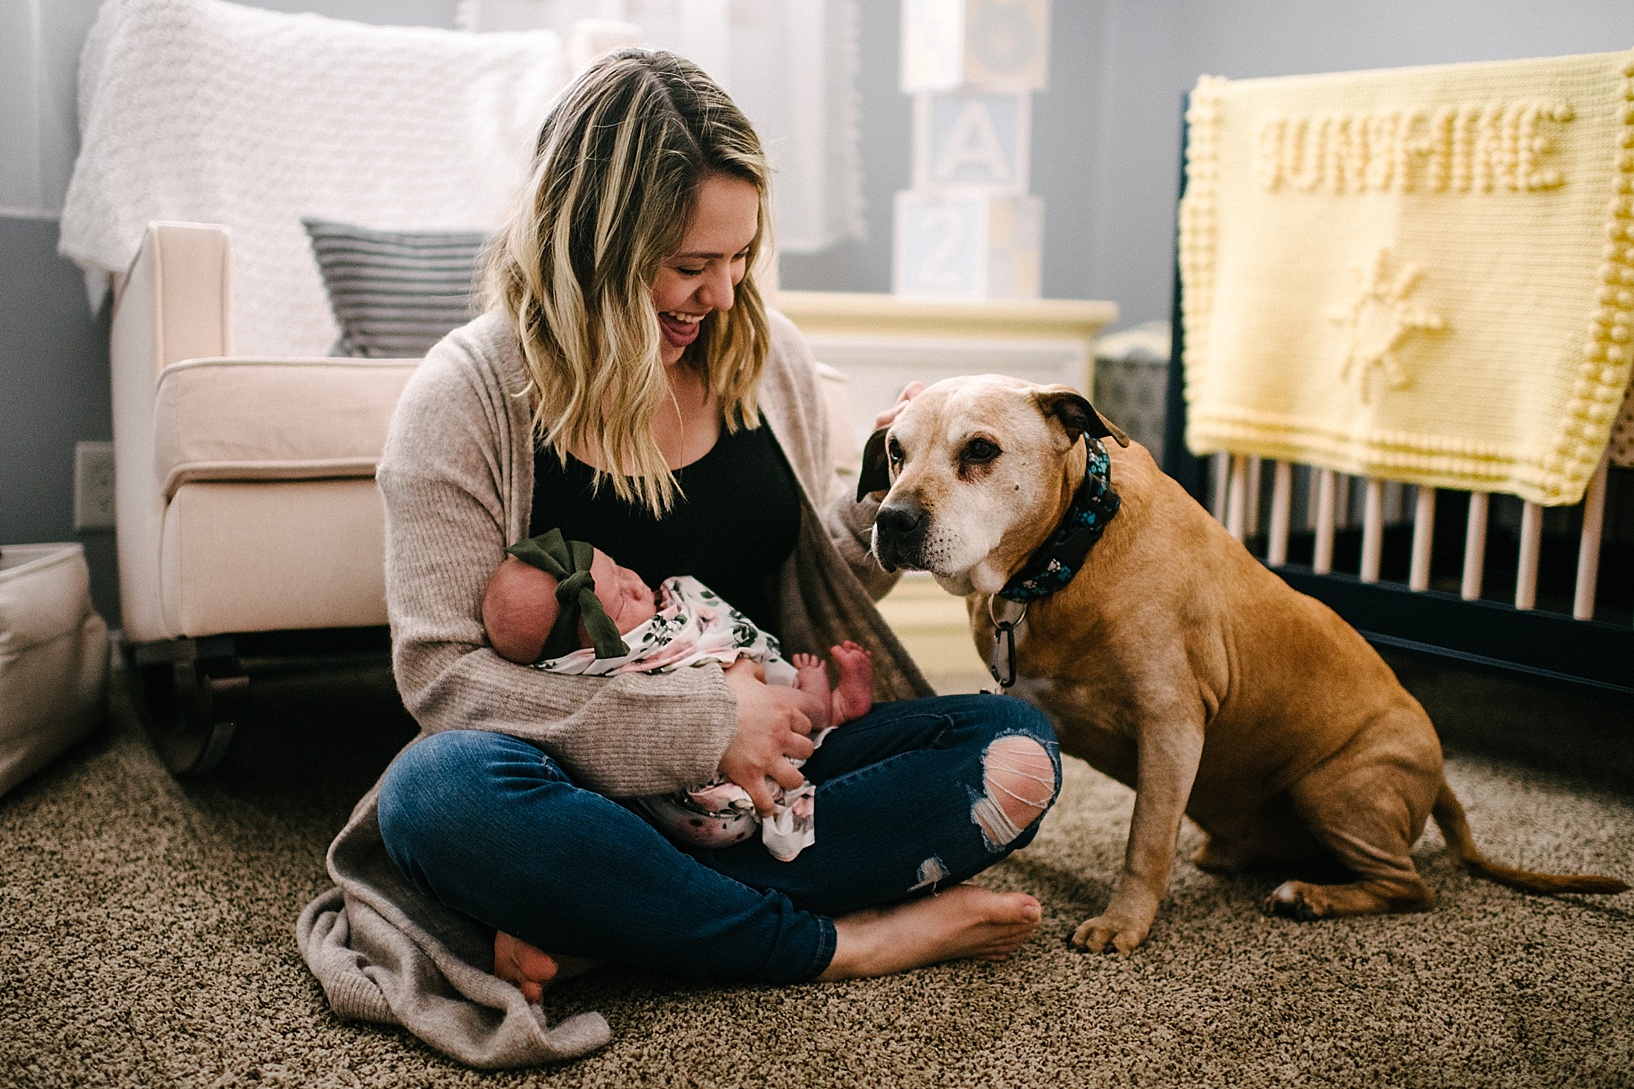 mother holding newborn sitting on floor of nursery with dog next to her